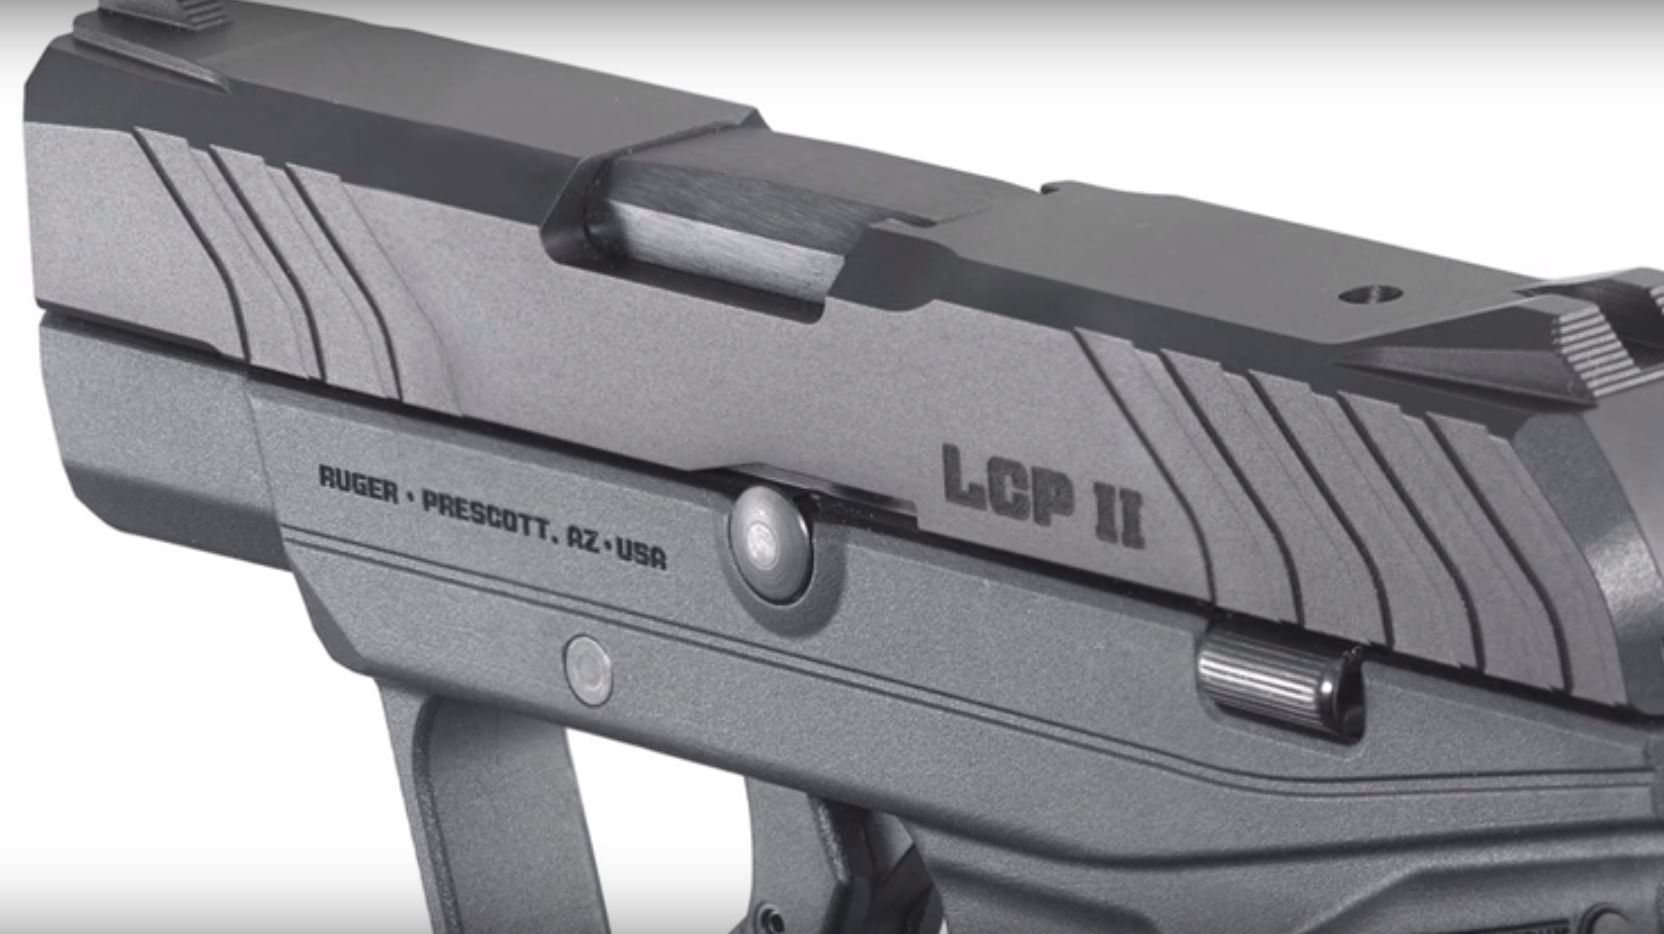 LCP II Ideal for Concealed Carry